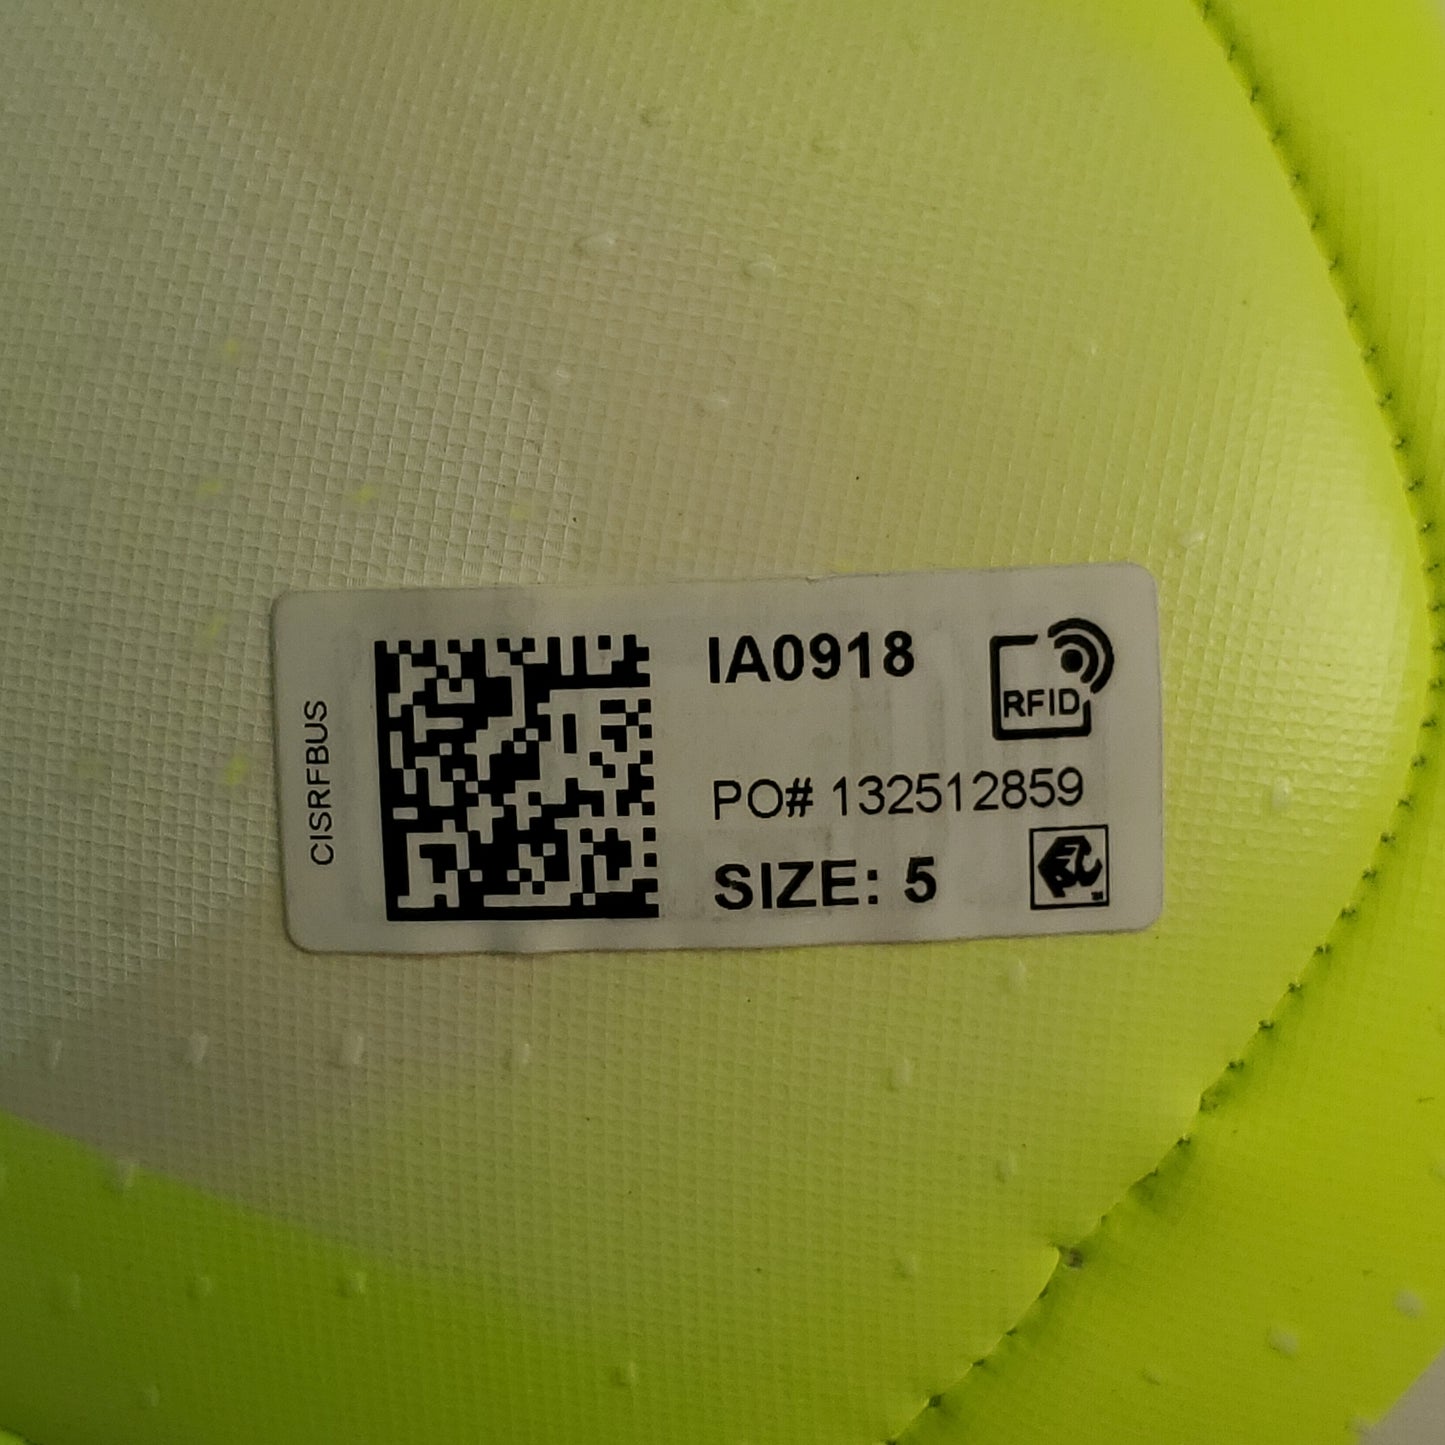 ADIDAS Predator Training Soccer Ball Official Size 5 & Weight IA0918 (New)